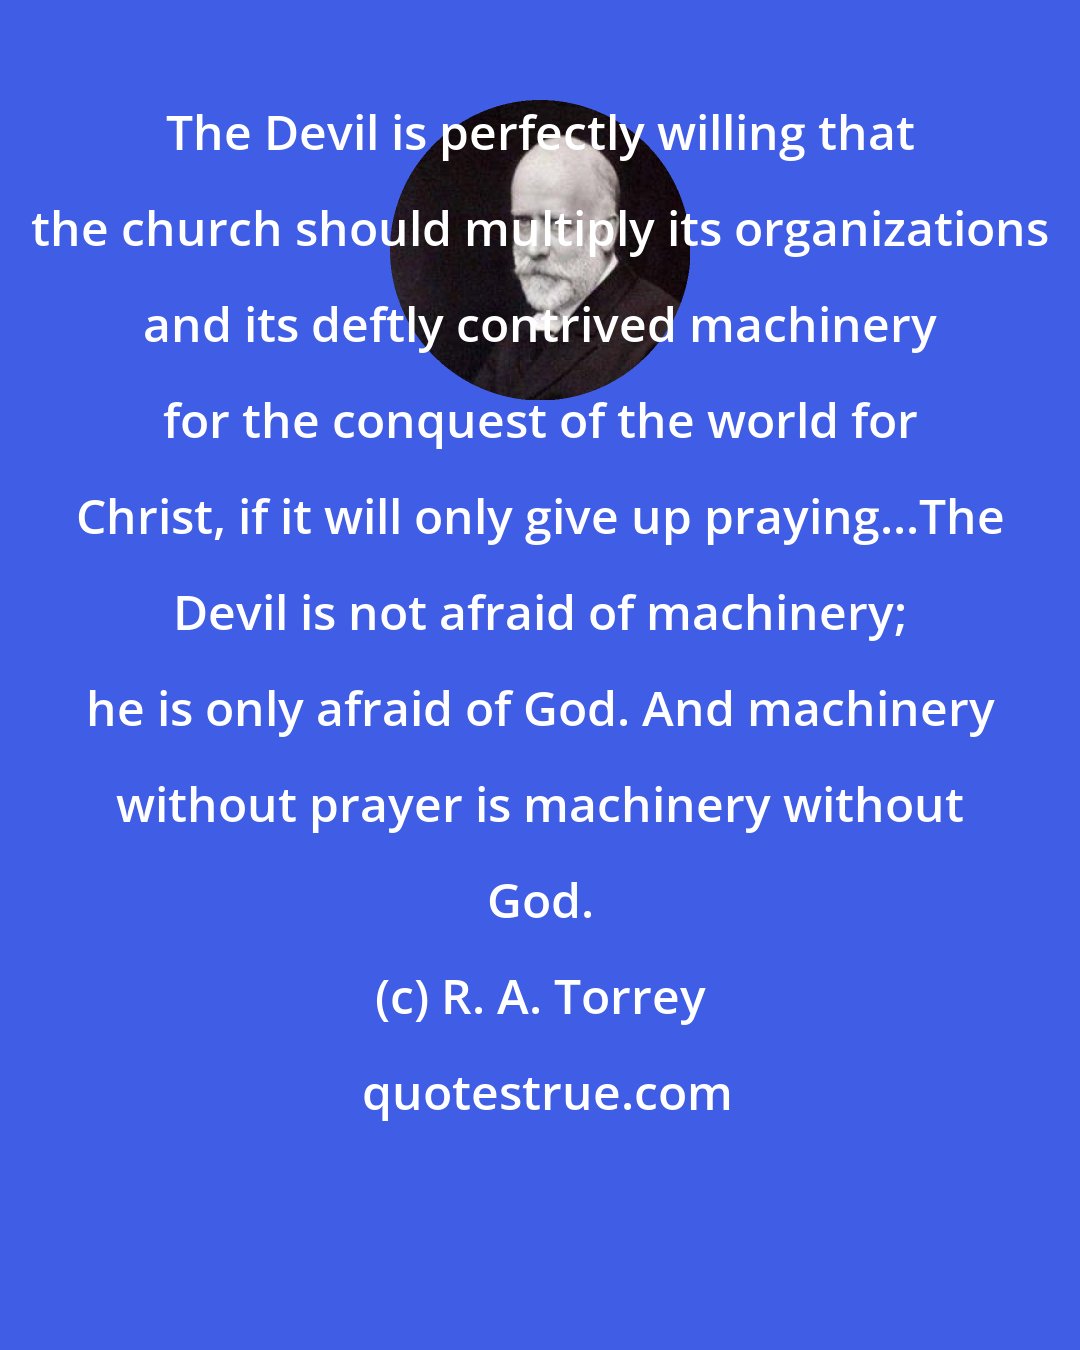 R. A. Torrey: The Devil is perfectly willing that the church should multiply its organizations and its deftly contrived machinery for the conquest of the world for Christ, if it will only give up praying...The Devil is not afraid of machinery; he is only afraid of God. And machinery without prayer is machinery without God.